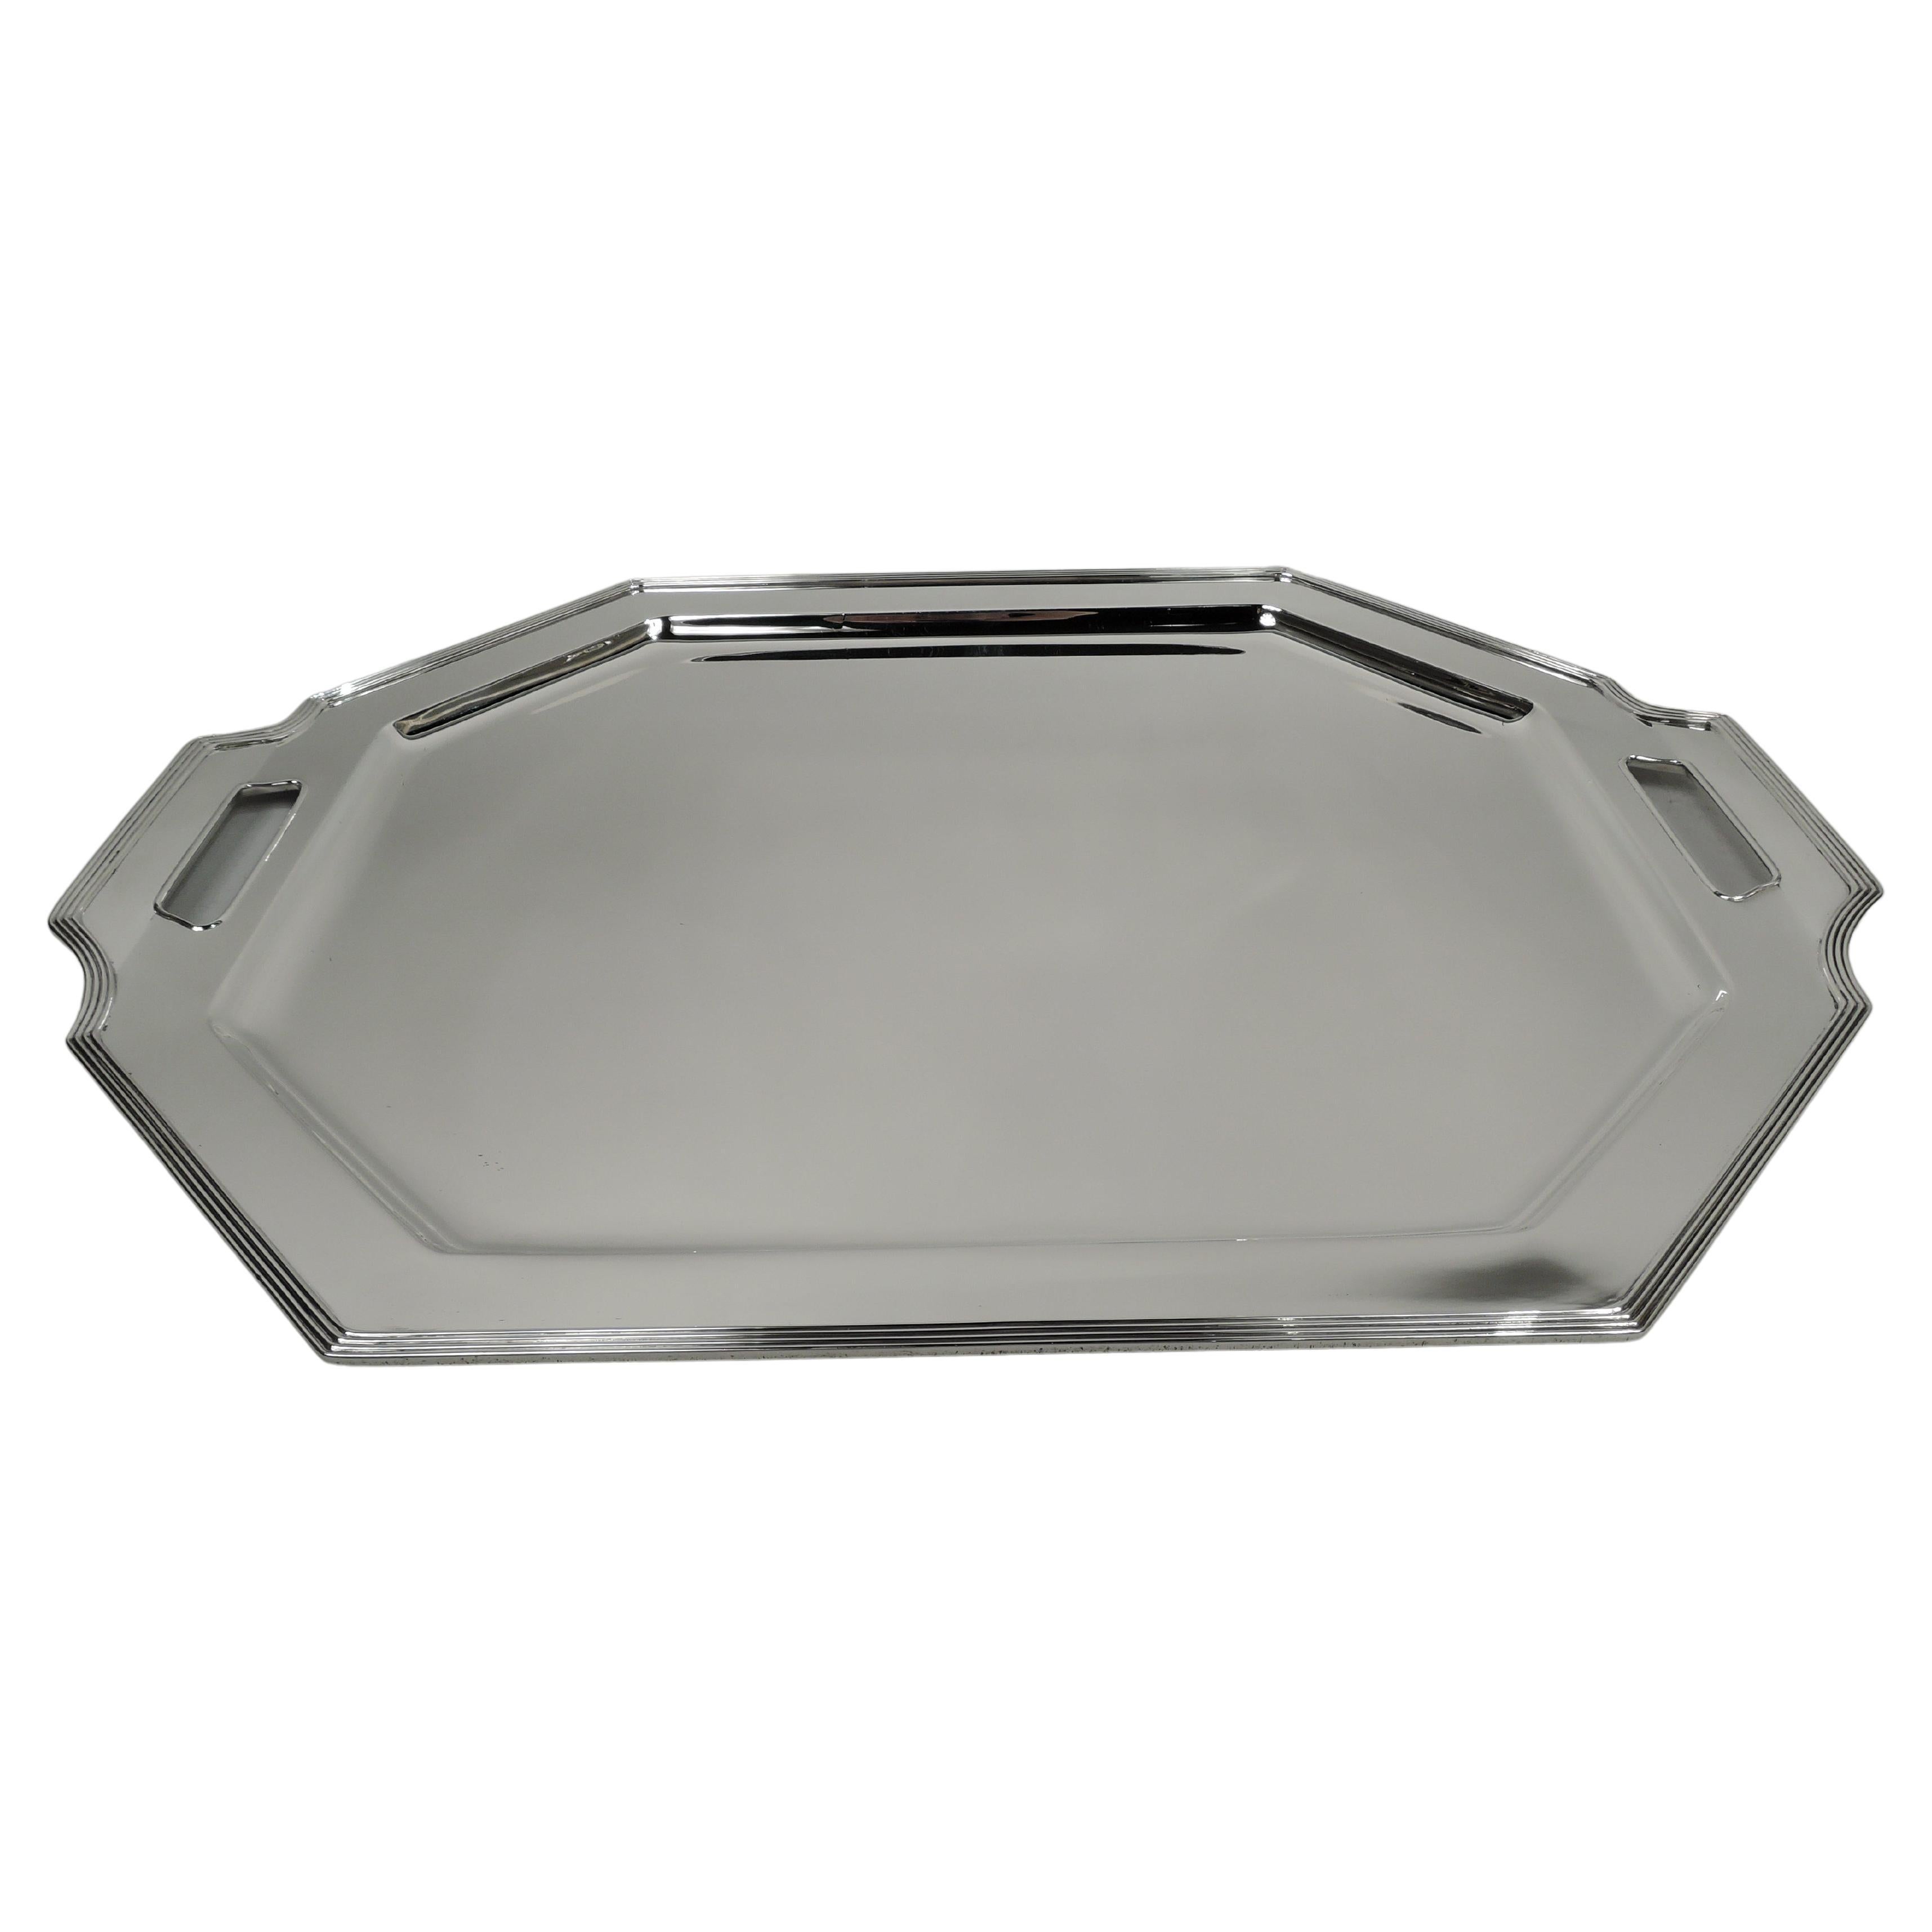 Large and Heavy Art Deco Sterling Silver Tea Tray by Tiffany